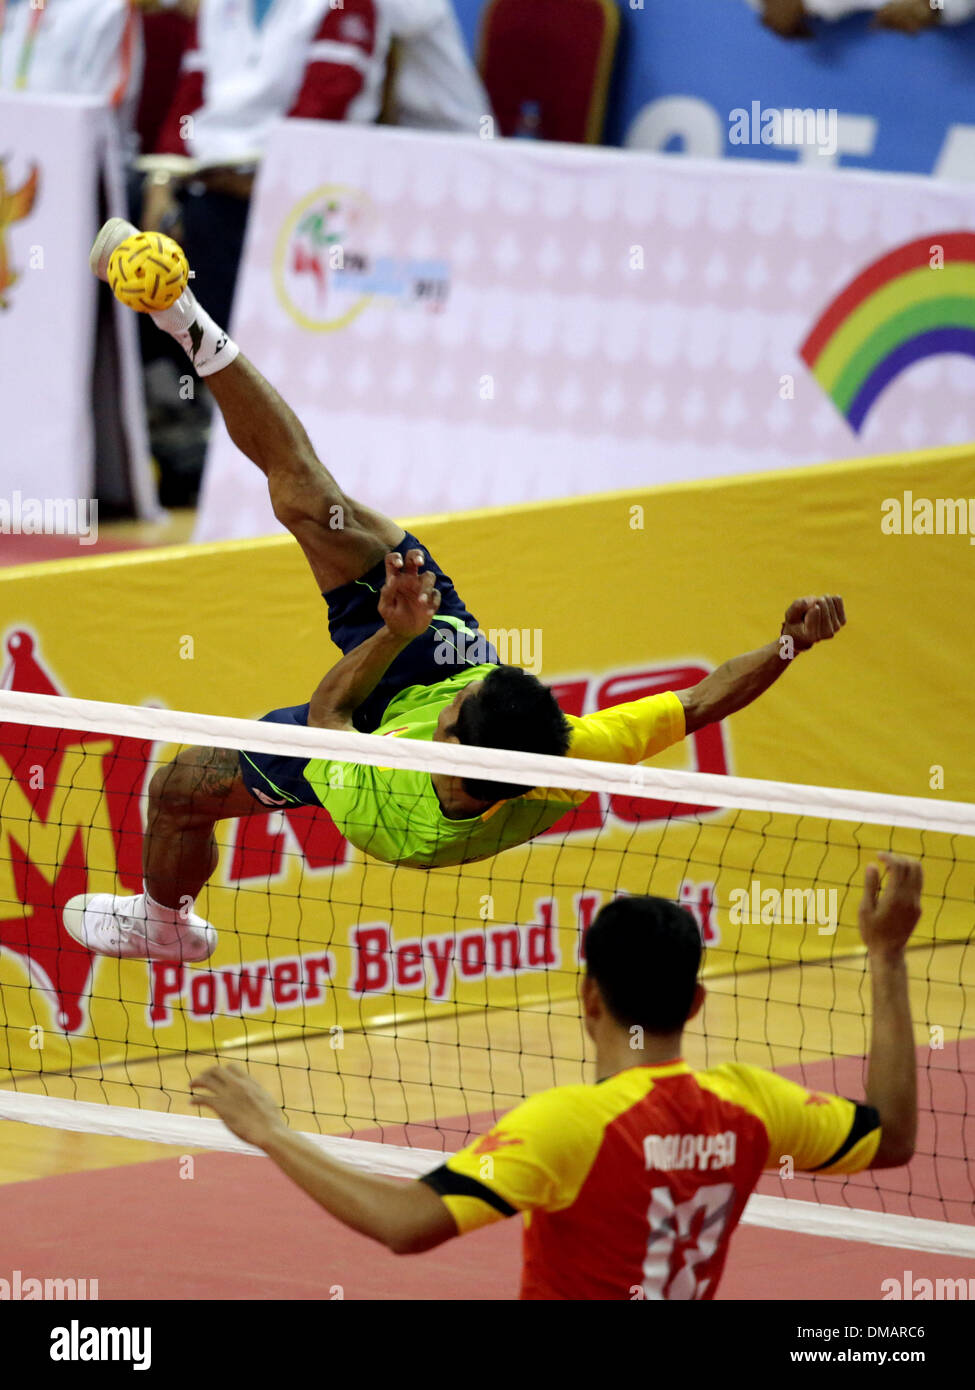 Nay Pyi Taw, Myanmar. 13th Dec, 2013. A player of Myanmar (rear) hits a shot during the men's Sepak Takraw match between Myanmar and Malaysia in the 27th Southeast Asian (SEA) Games in Nay Pyi Taw, Myanmar, Dec. 12, 2013. © U Aung/Xinhua/Alamy Live News Stock Photo